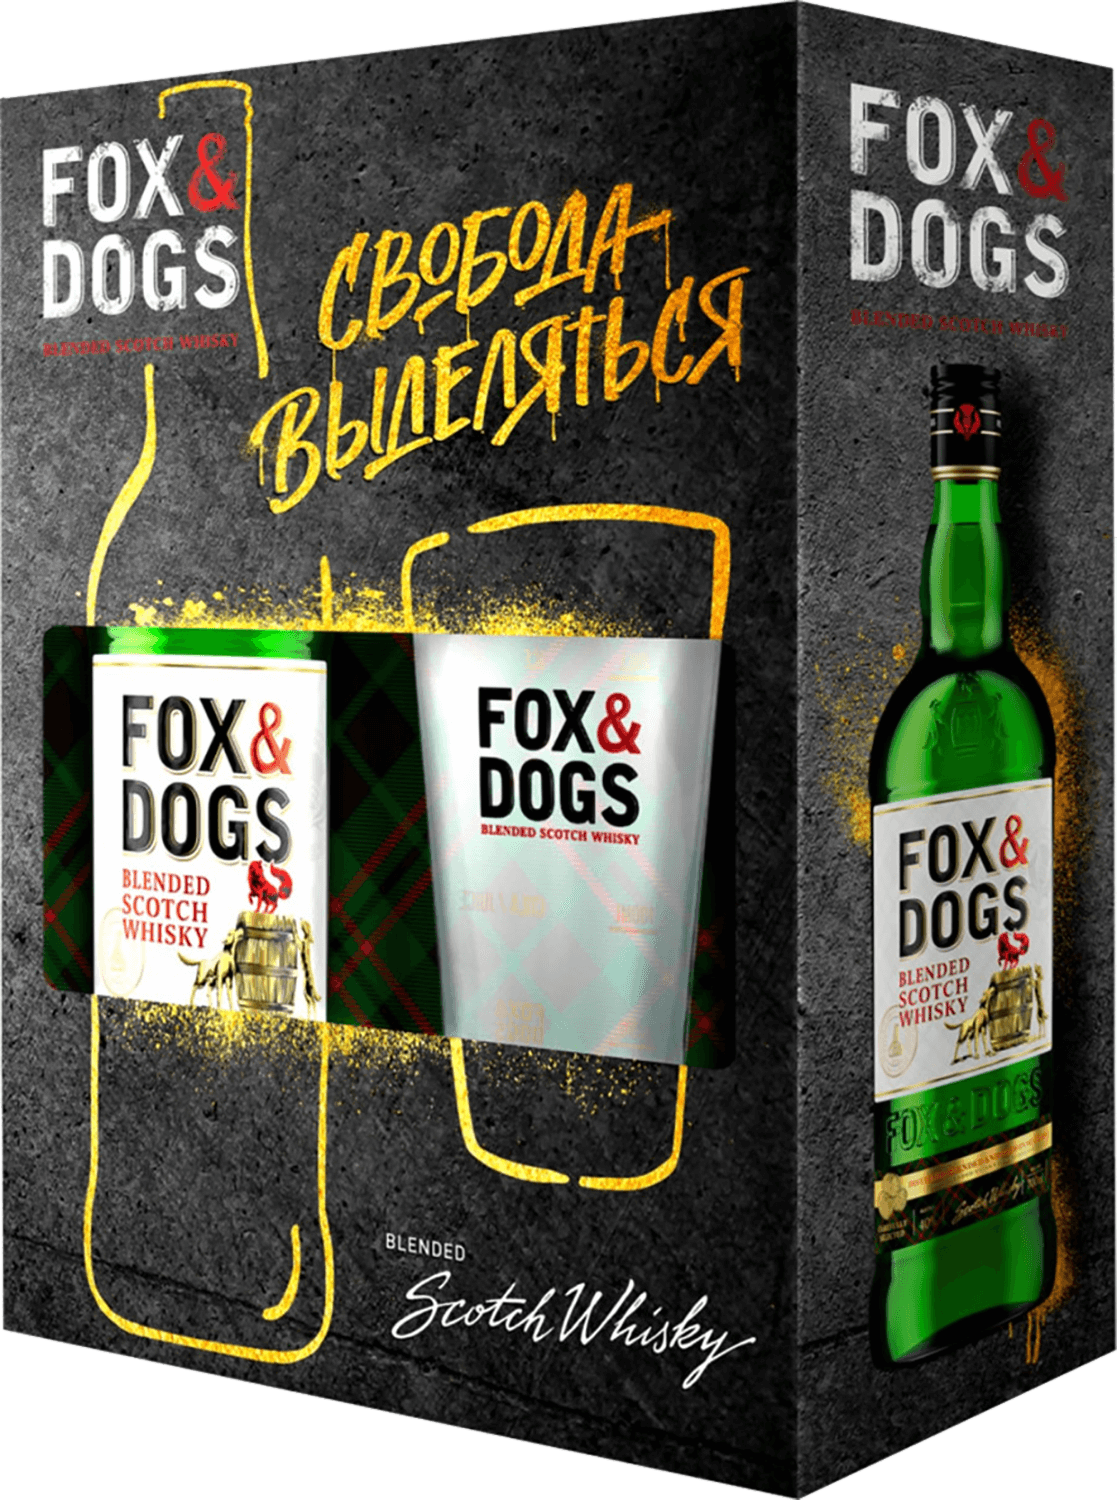 Fox and Dogs Blended Scotch Whisky (gift box with a glass) clan macgregor blended scotch whisky gift box with a glass